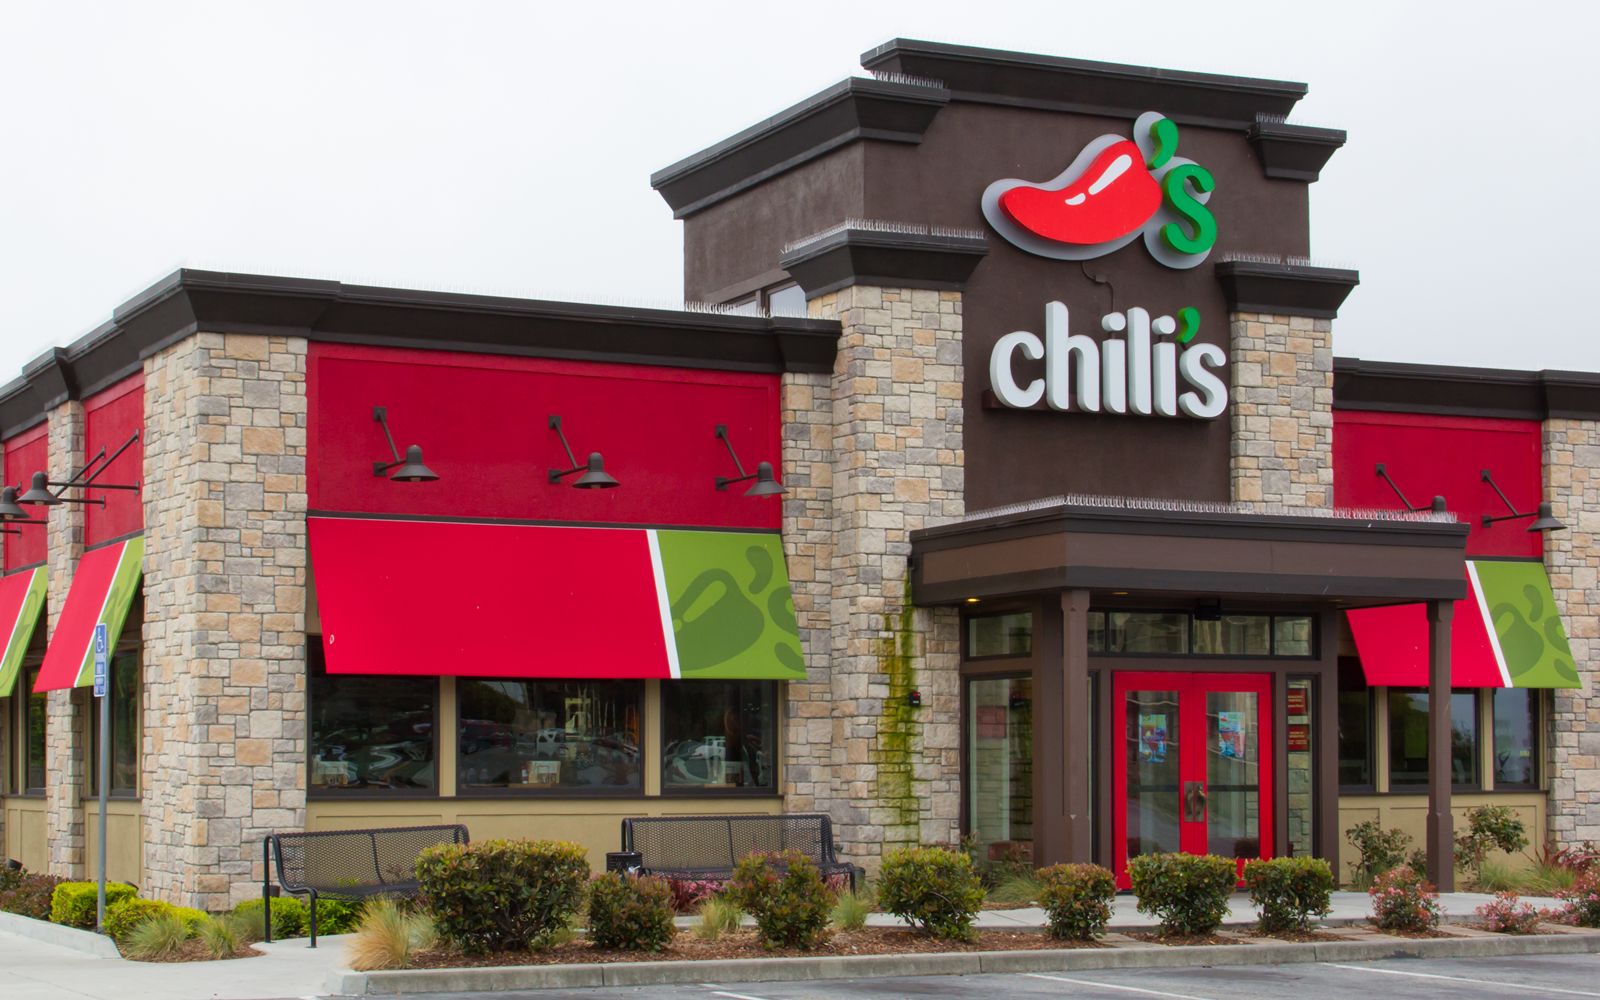 FCPT Announces Agreement to Acquire up to 48 Chili's Restaurant Properties for up to $155.7 Million